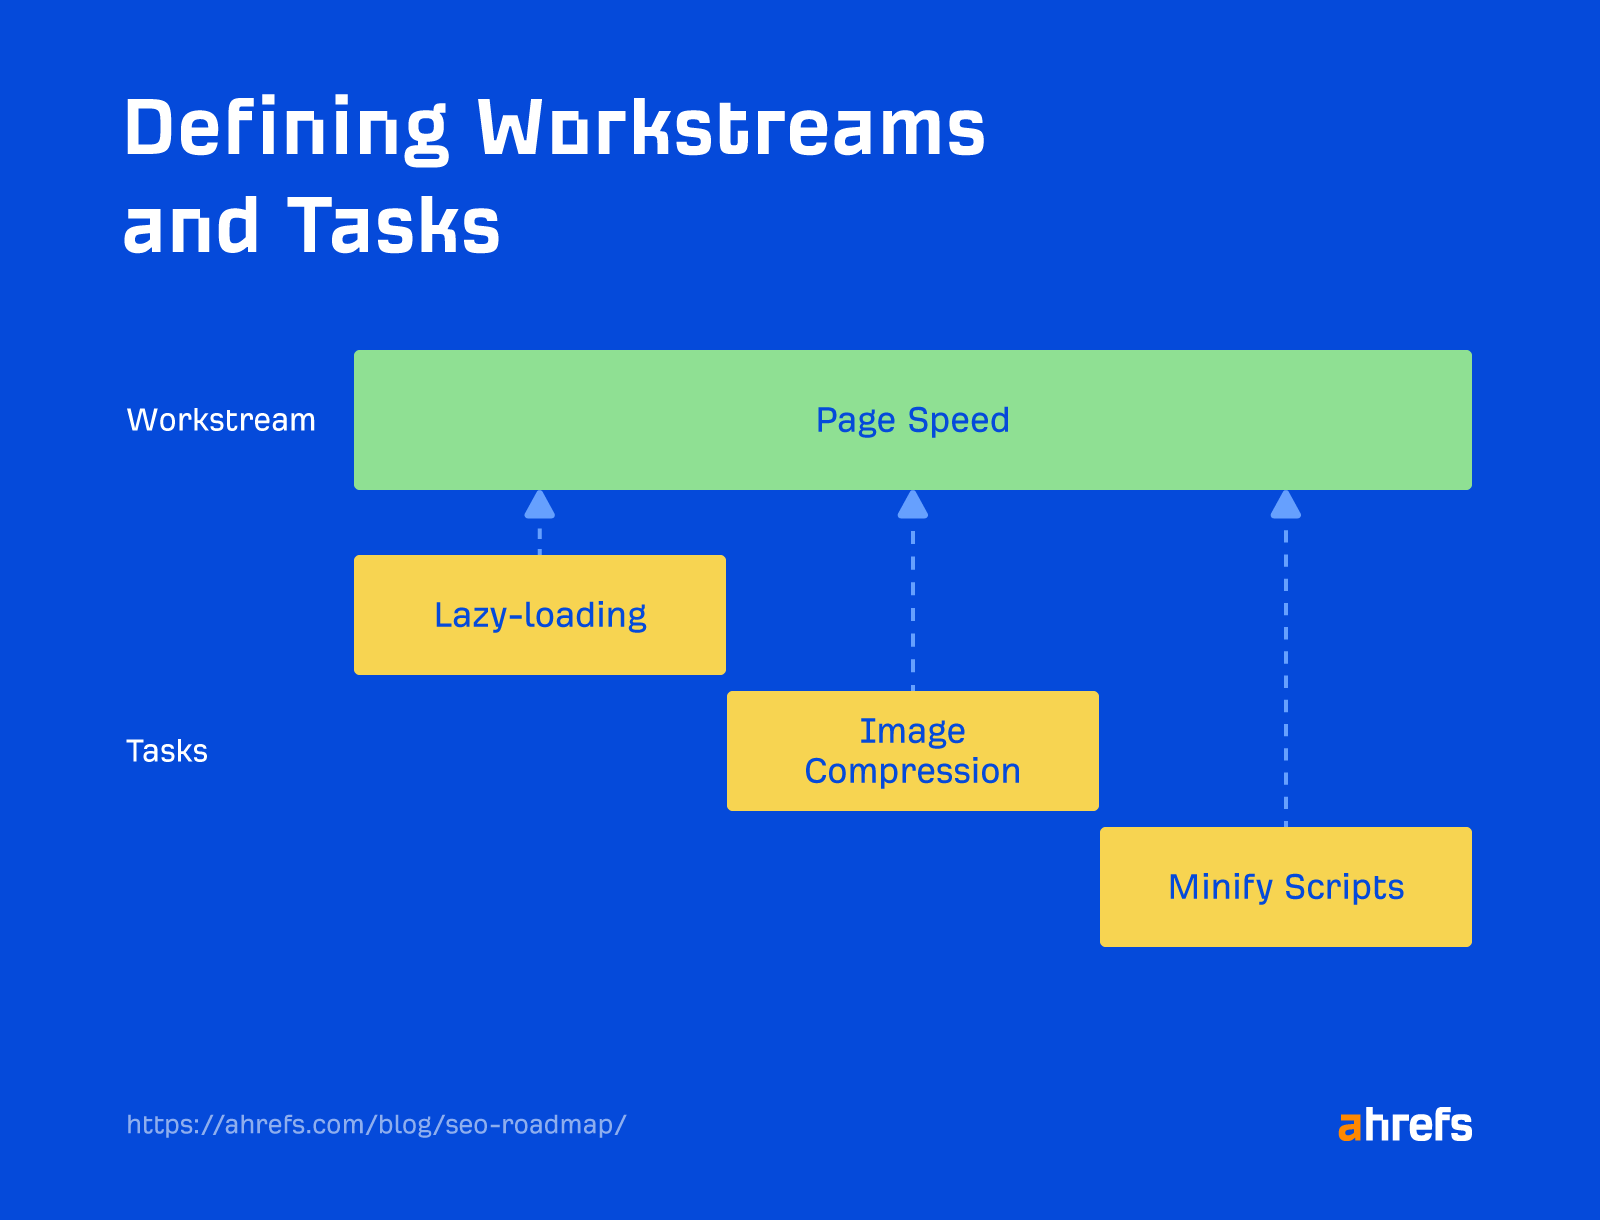 Individual tasks as part of an overarching workstream